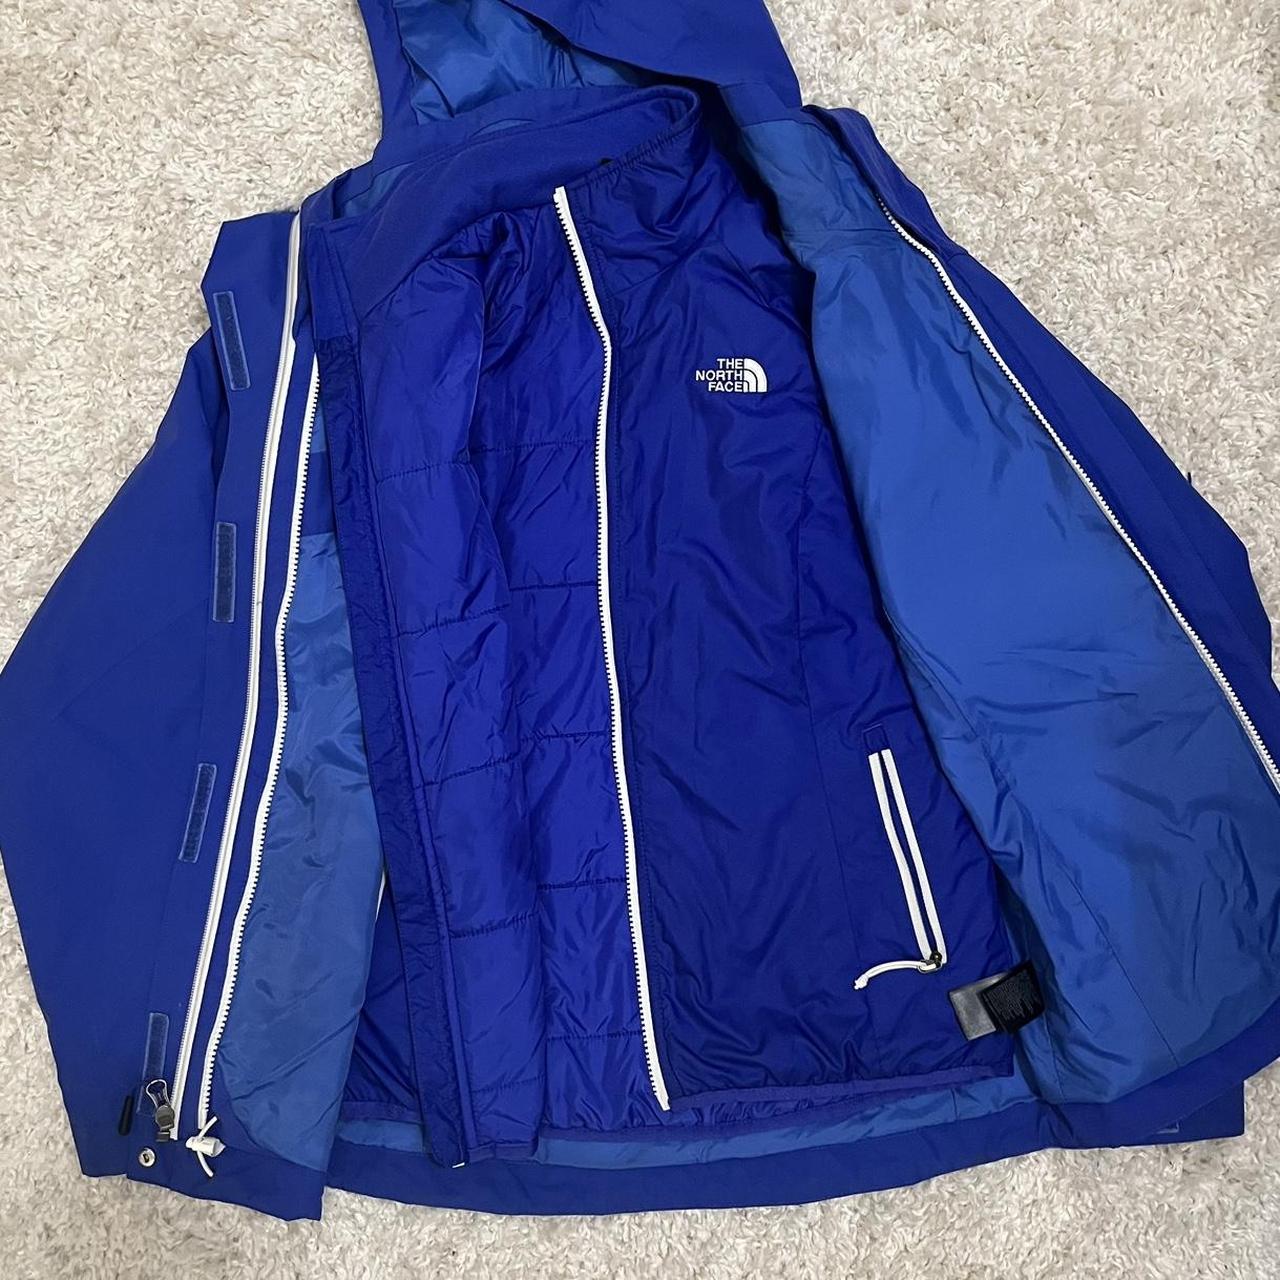 The North Face Women's Blue Coat (2)